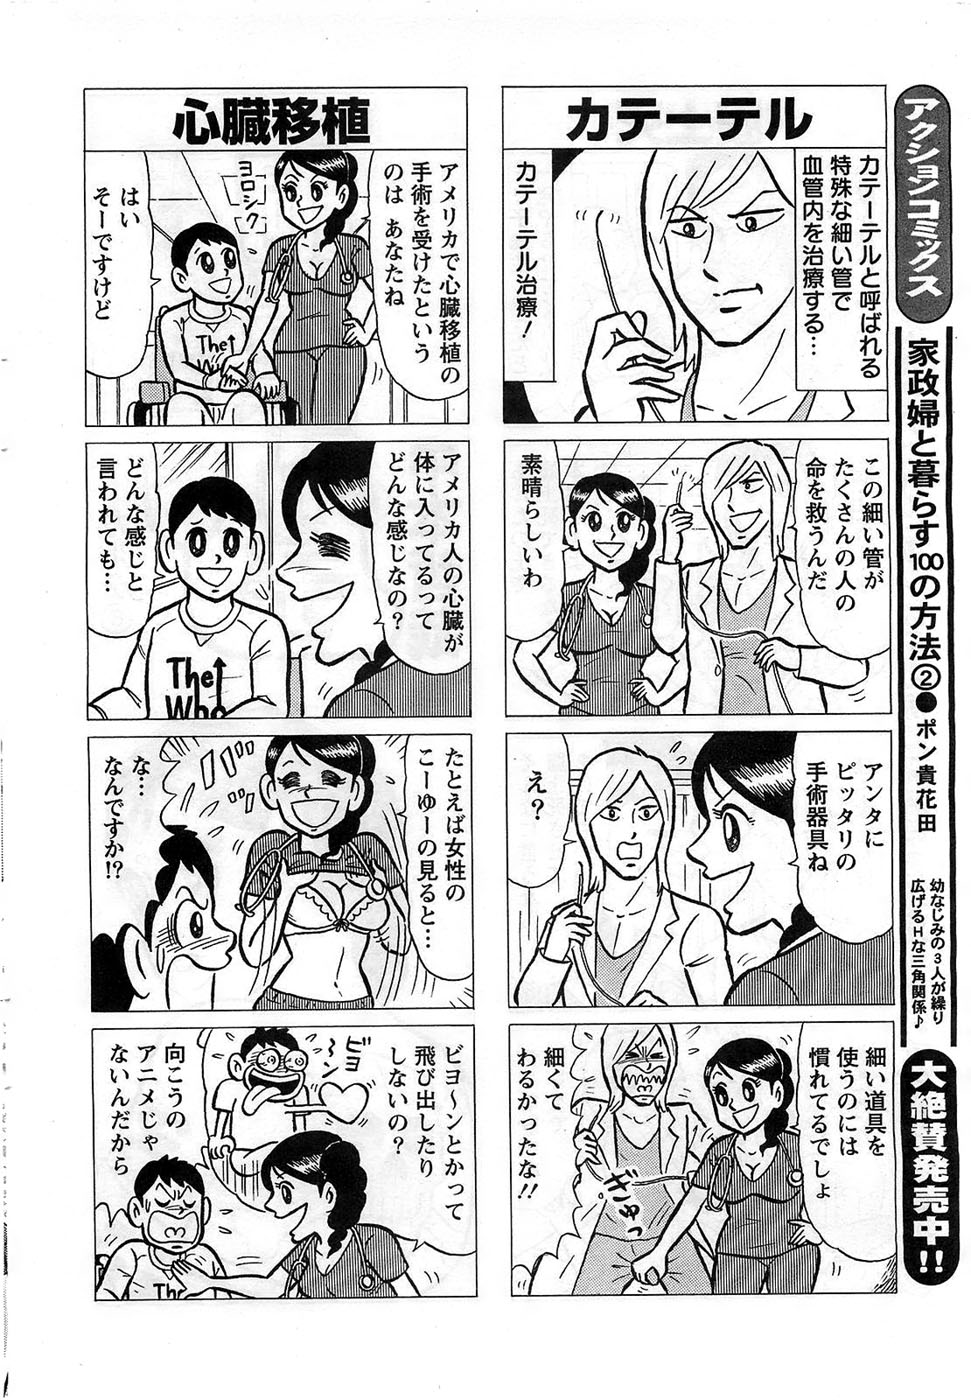 Action Pizazz DX 2008-11 page 44 full